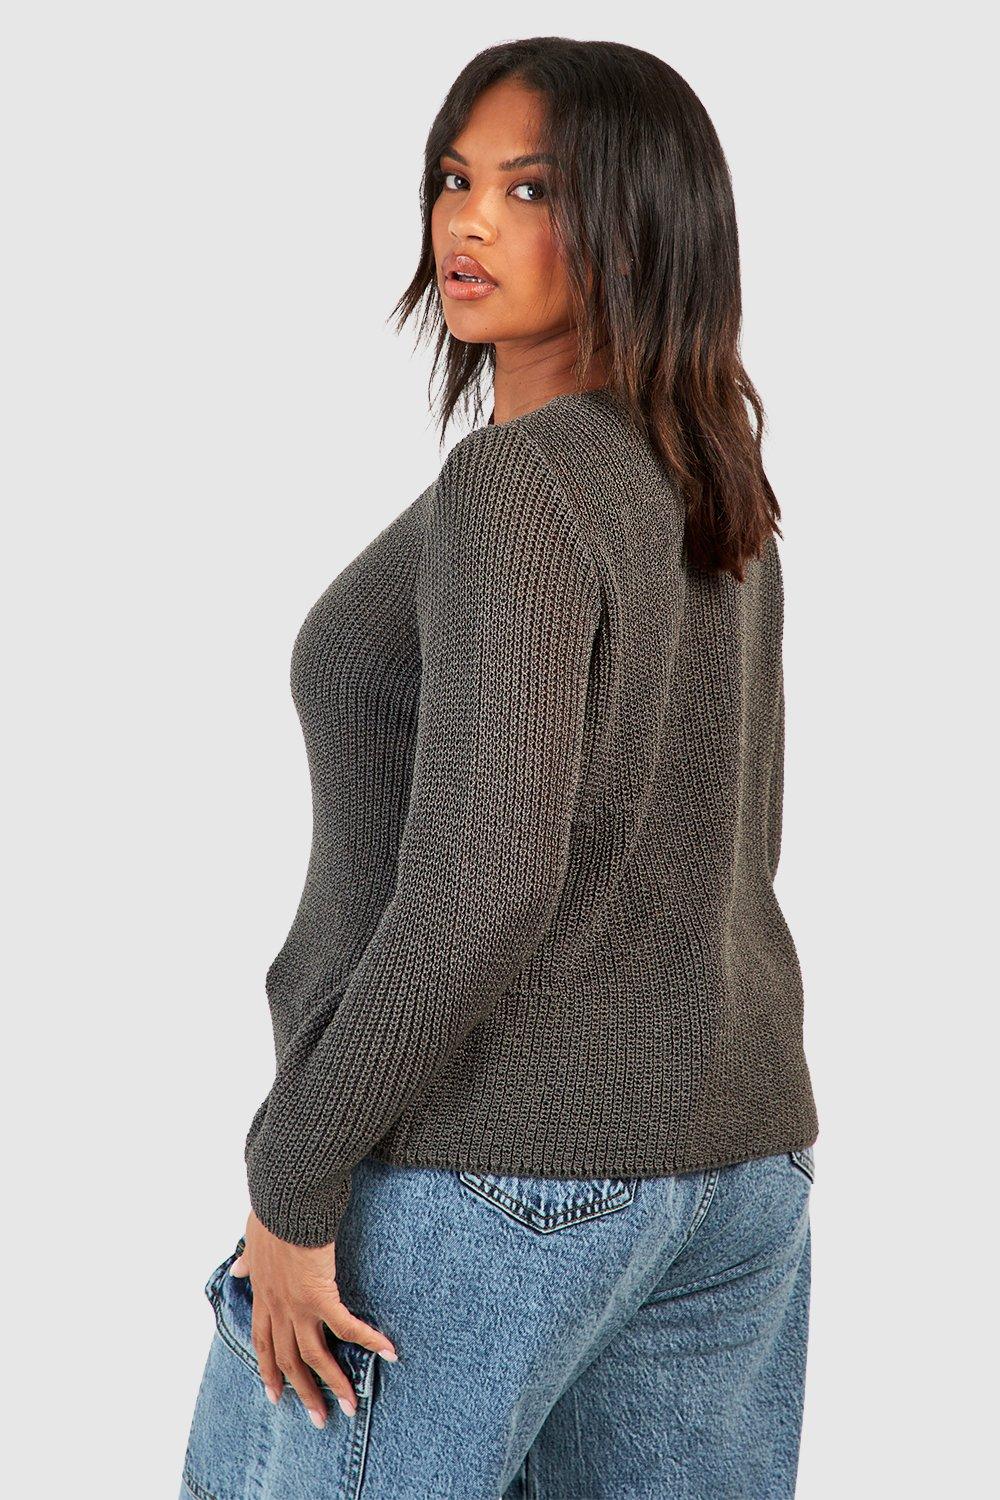 boohoo Plus Long Sleeve Hook and Eye Knitted Top - Grey - Size 14